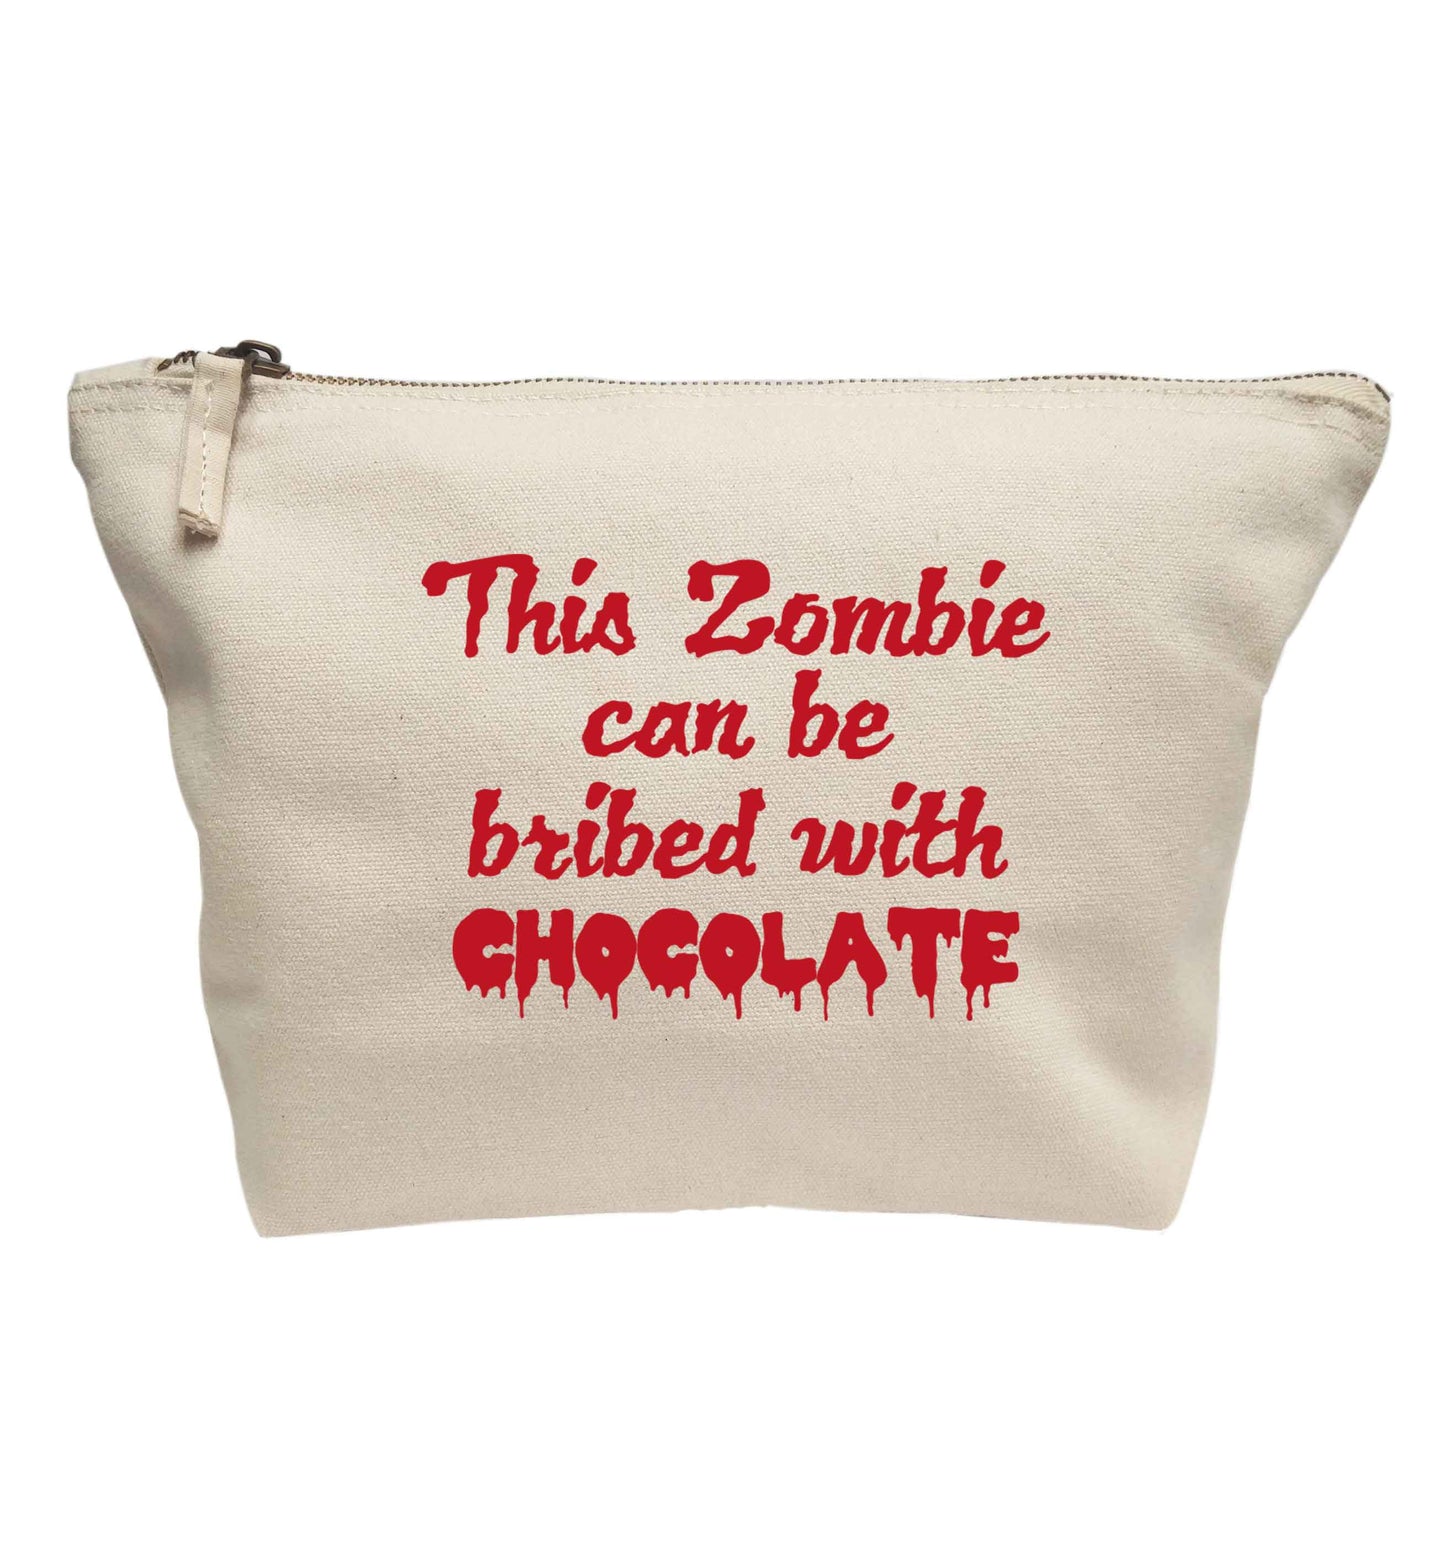 This zombie can be bribed with chocolate | Makeup / wash bag